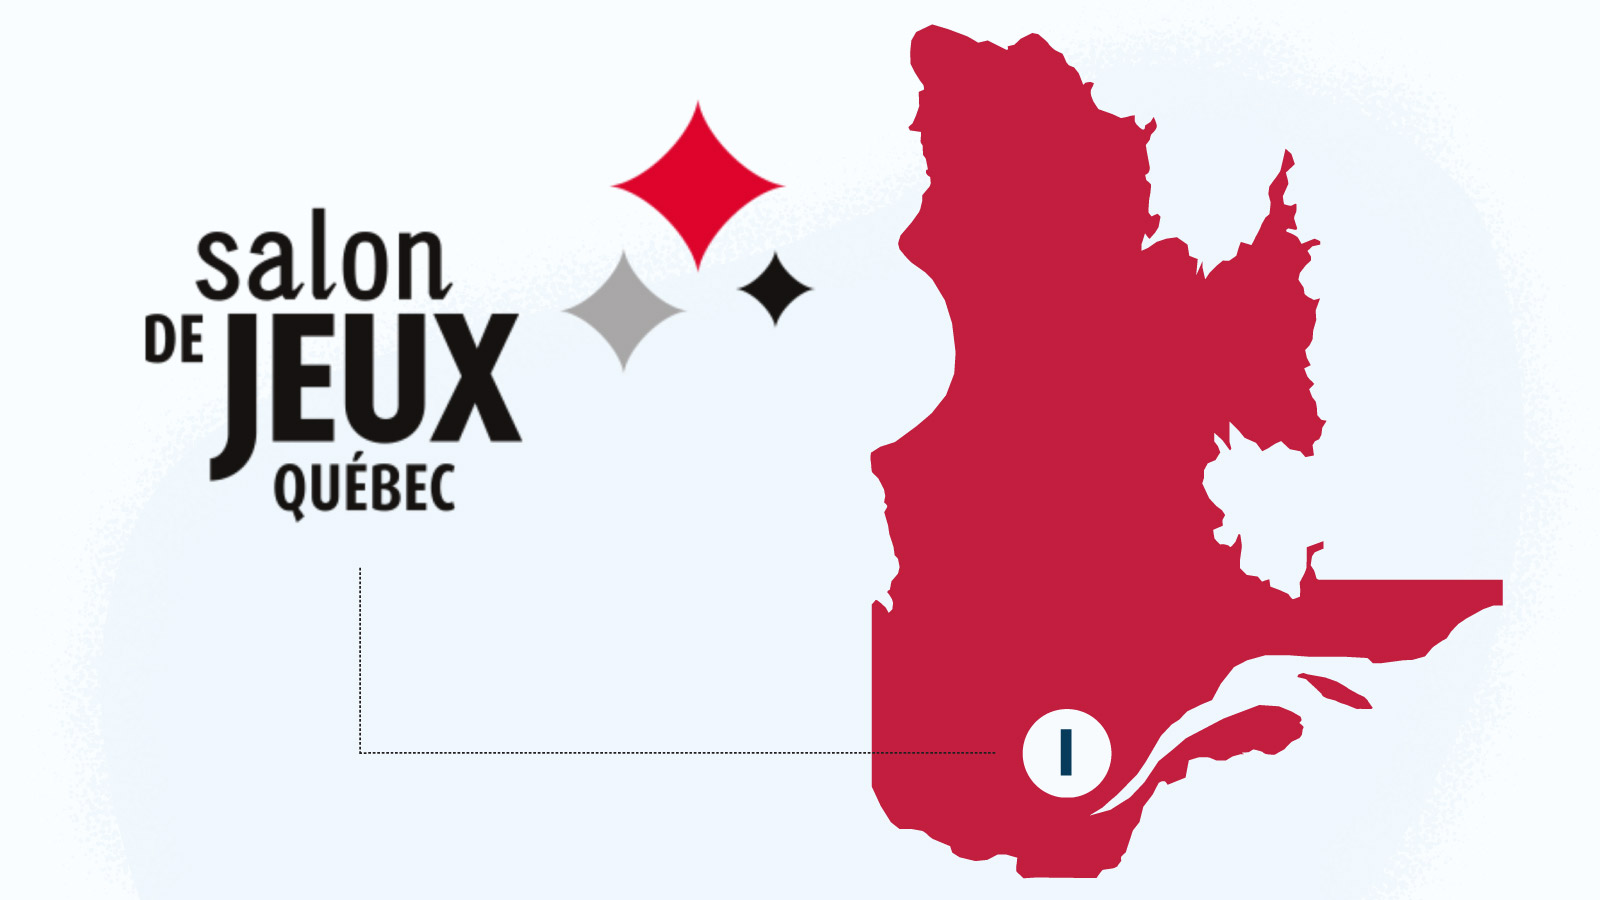 How many casinos are there in Québec City